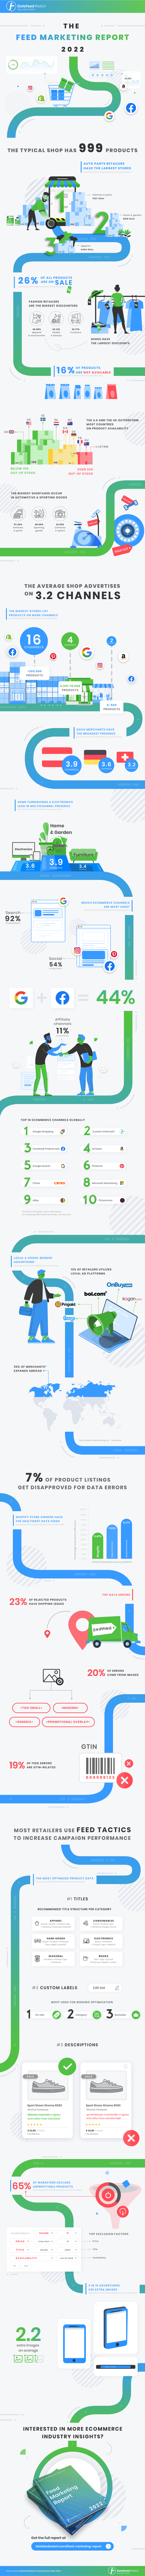 Datafeedwatch eCommerce Advertising Report 2022 [infographic]